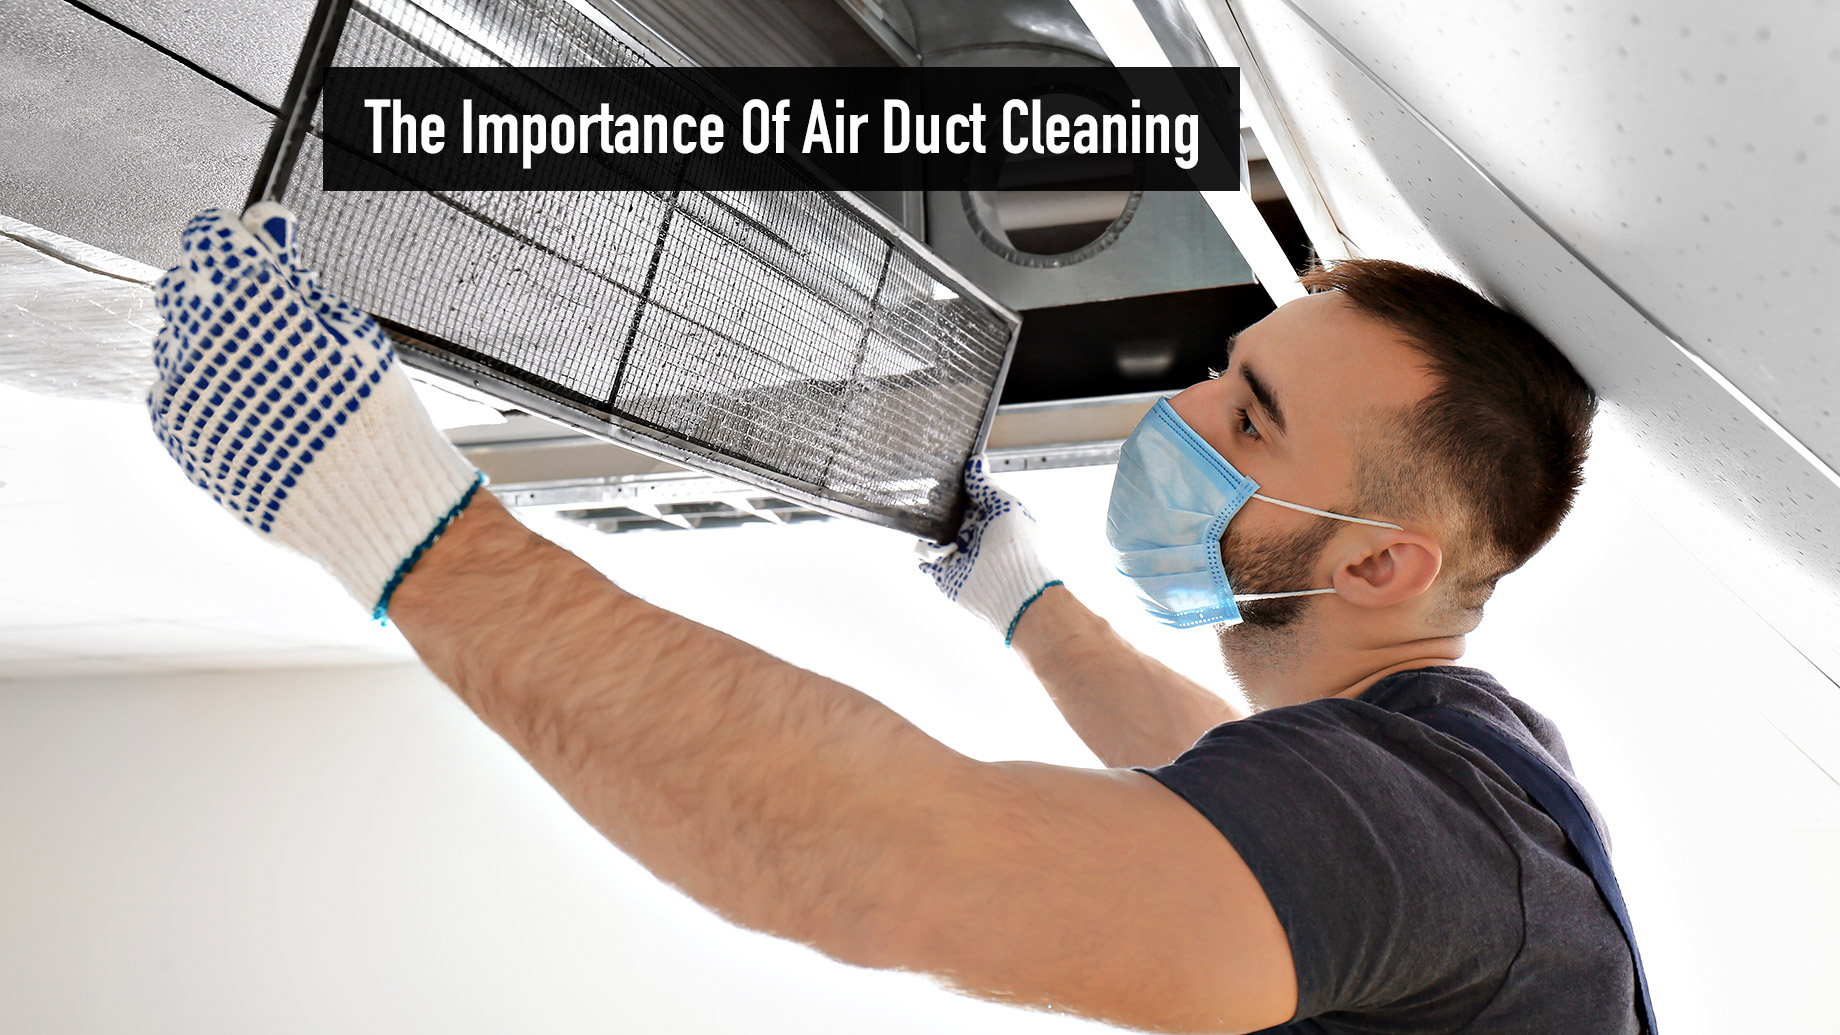 The Importance Of Air Duct Cleaning